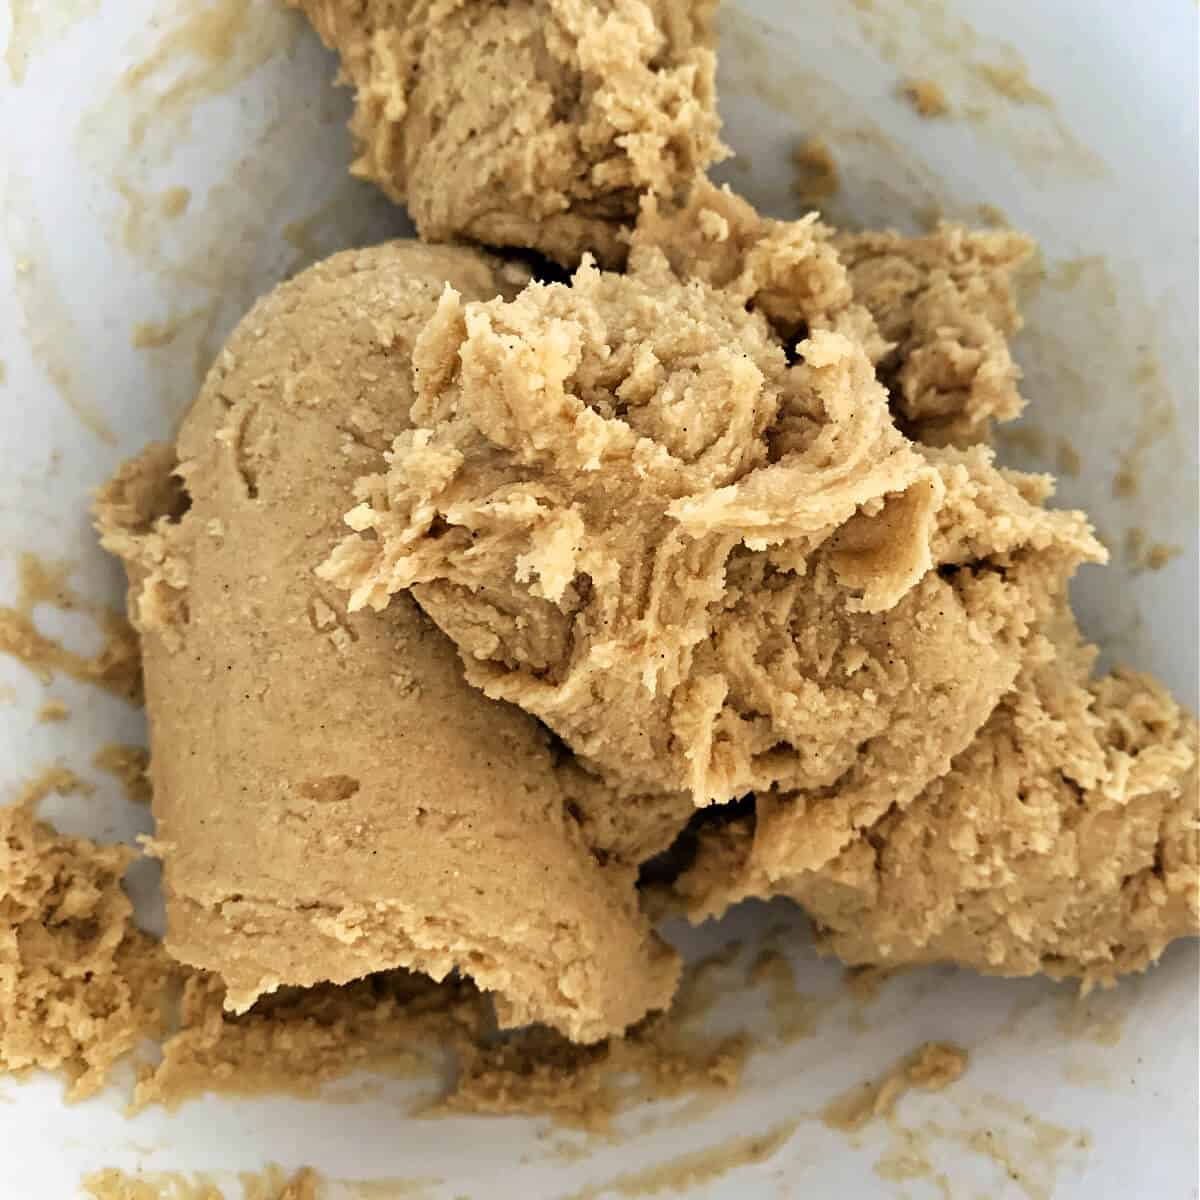 Cookie dough ready to use.